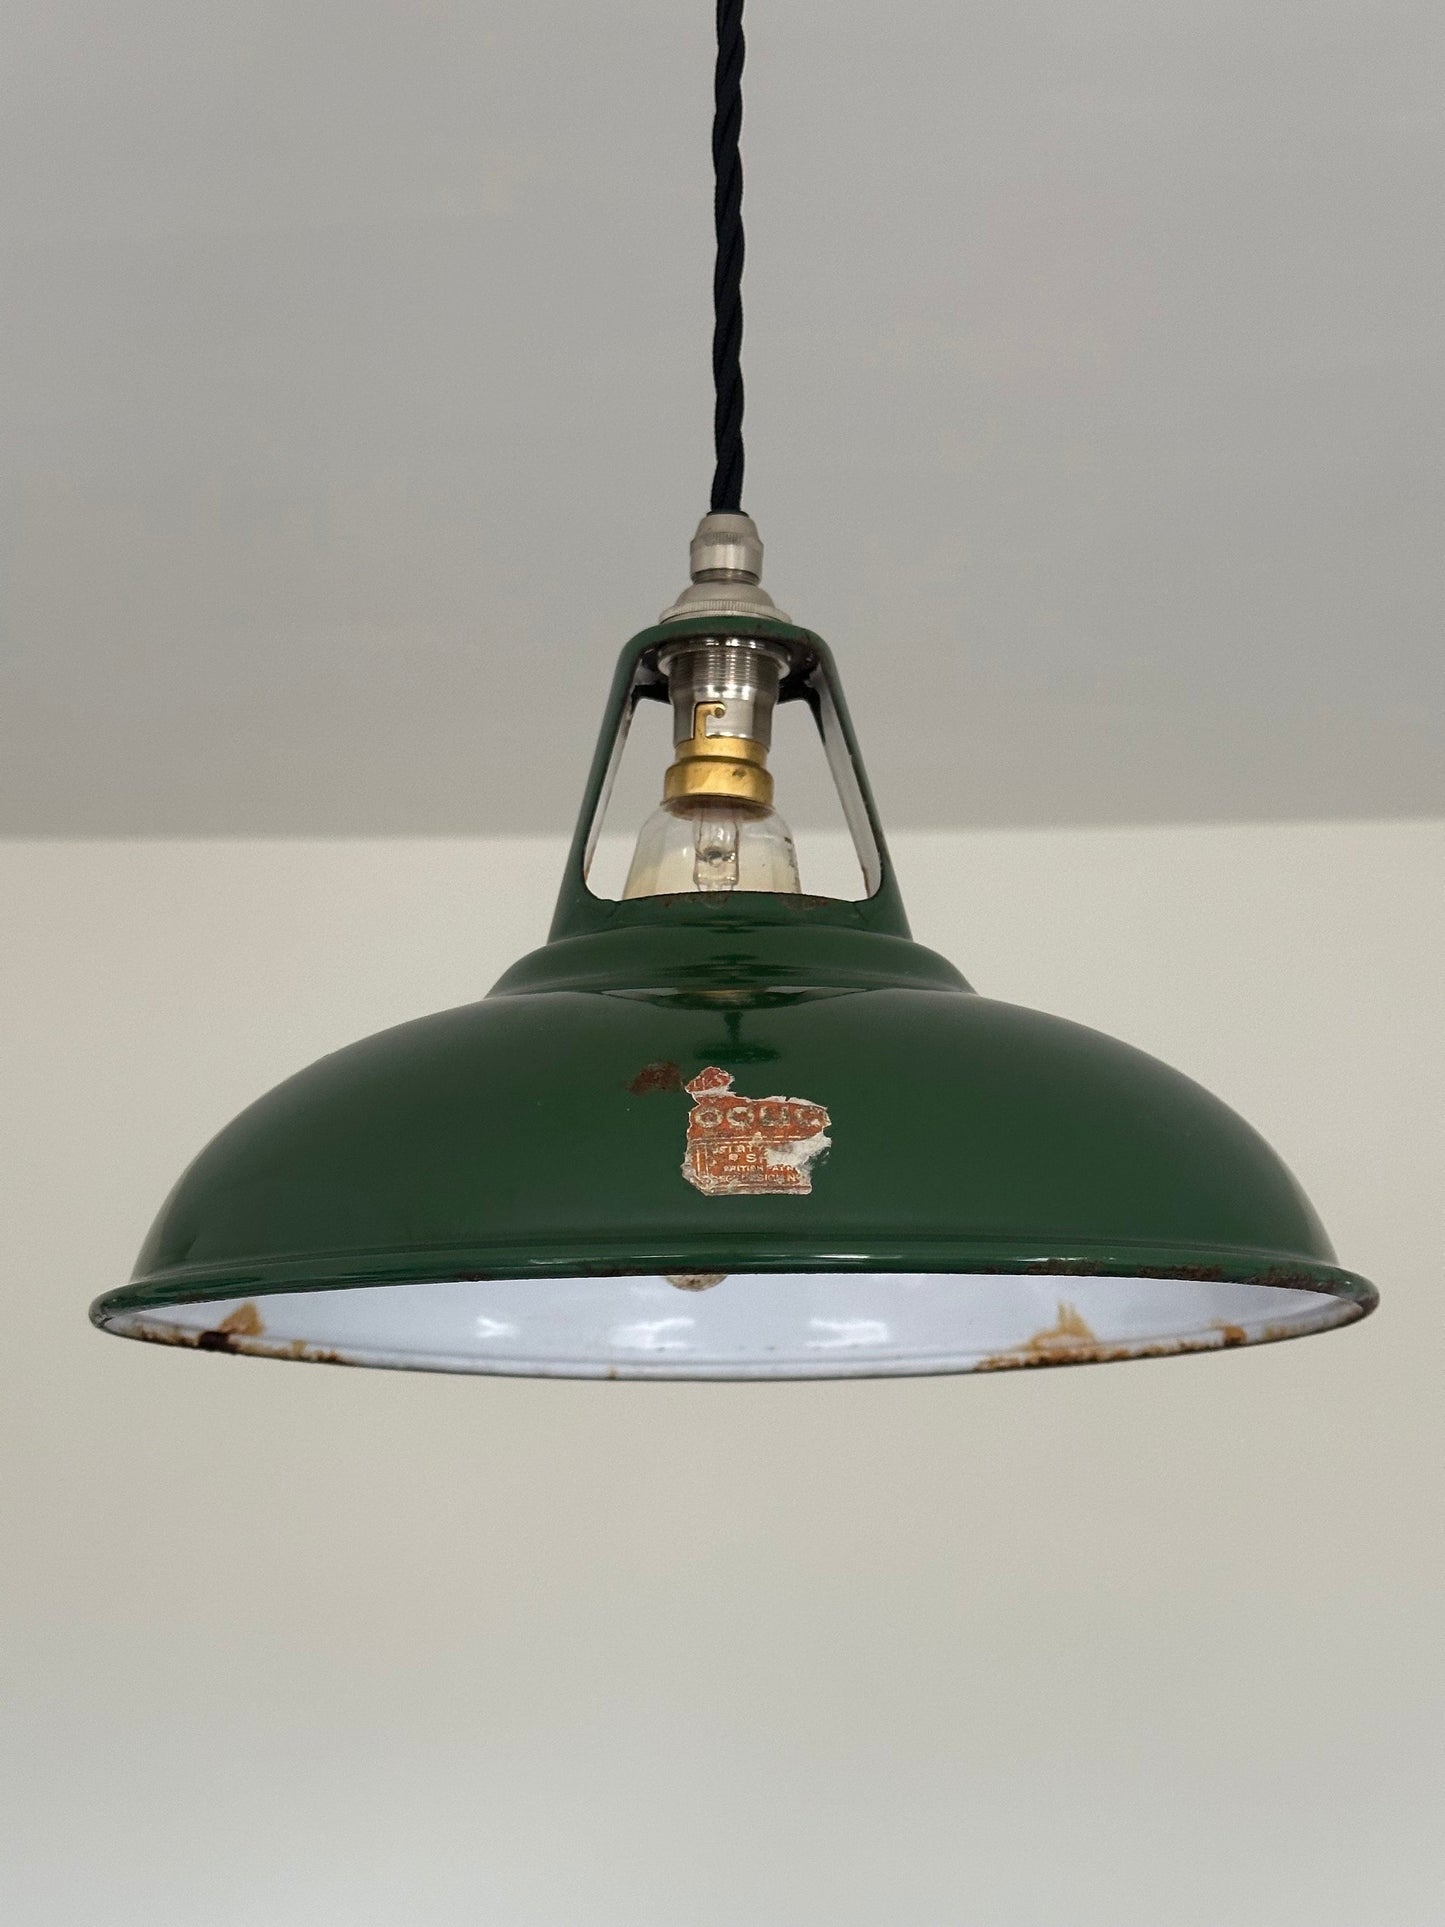 Geniune Green Solid Coolicon 1932 Shade Pendant Set Light 11 Inch | Ceiling Dining Room | Kitchen Table | Vintage Filament Bulb